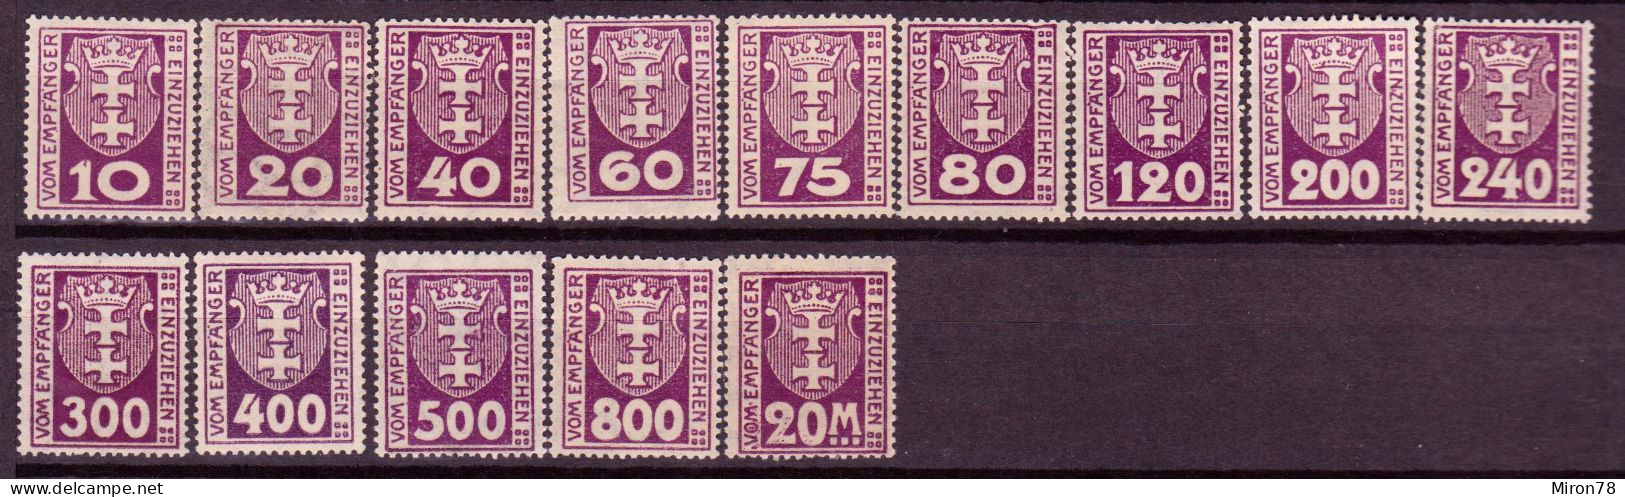 Stamps Danzig 1923 POSTAGE DUE STAMPS Mint MNH Lot6 - Impuestos